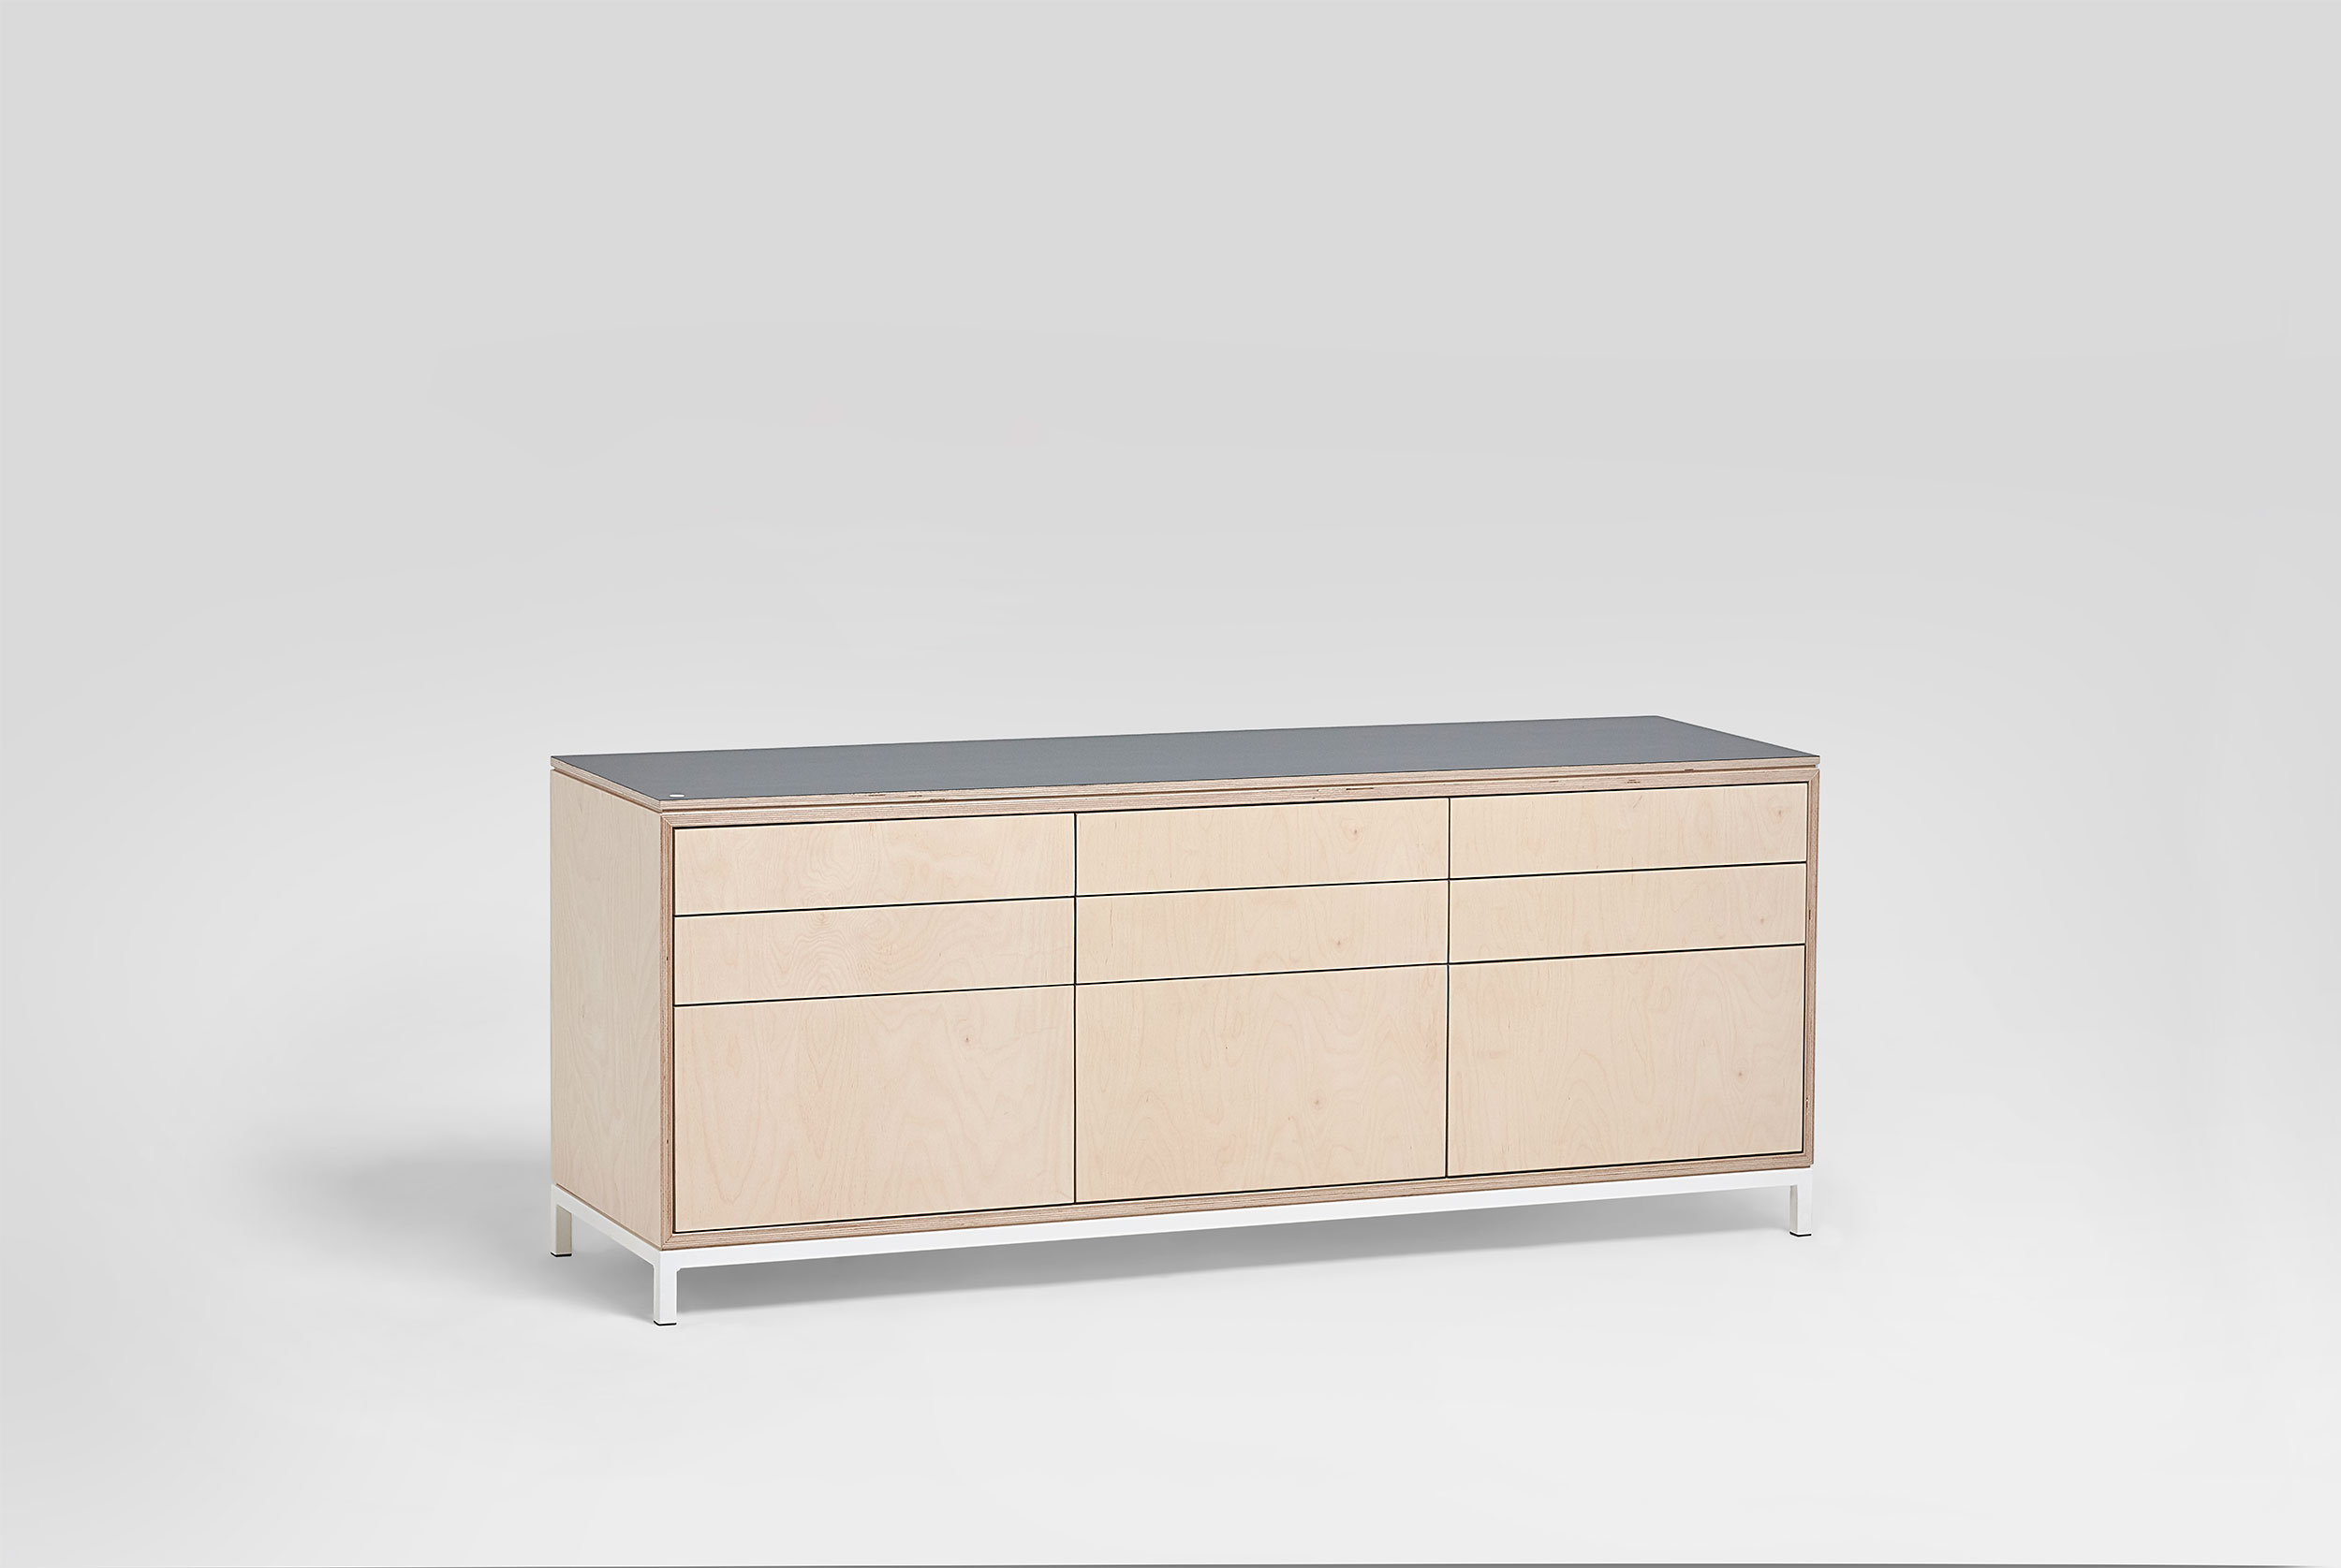 cuboid-credenza-front-3